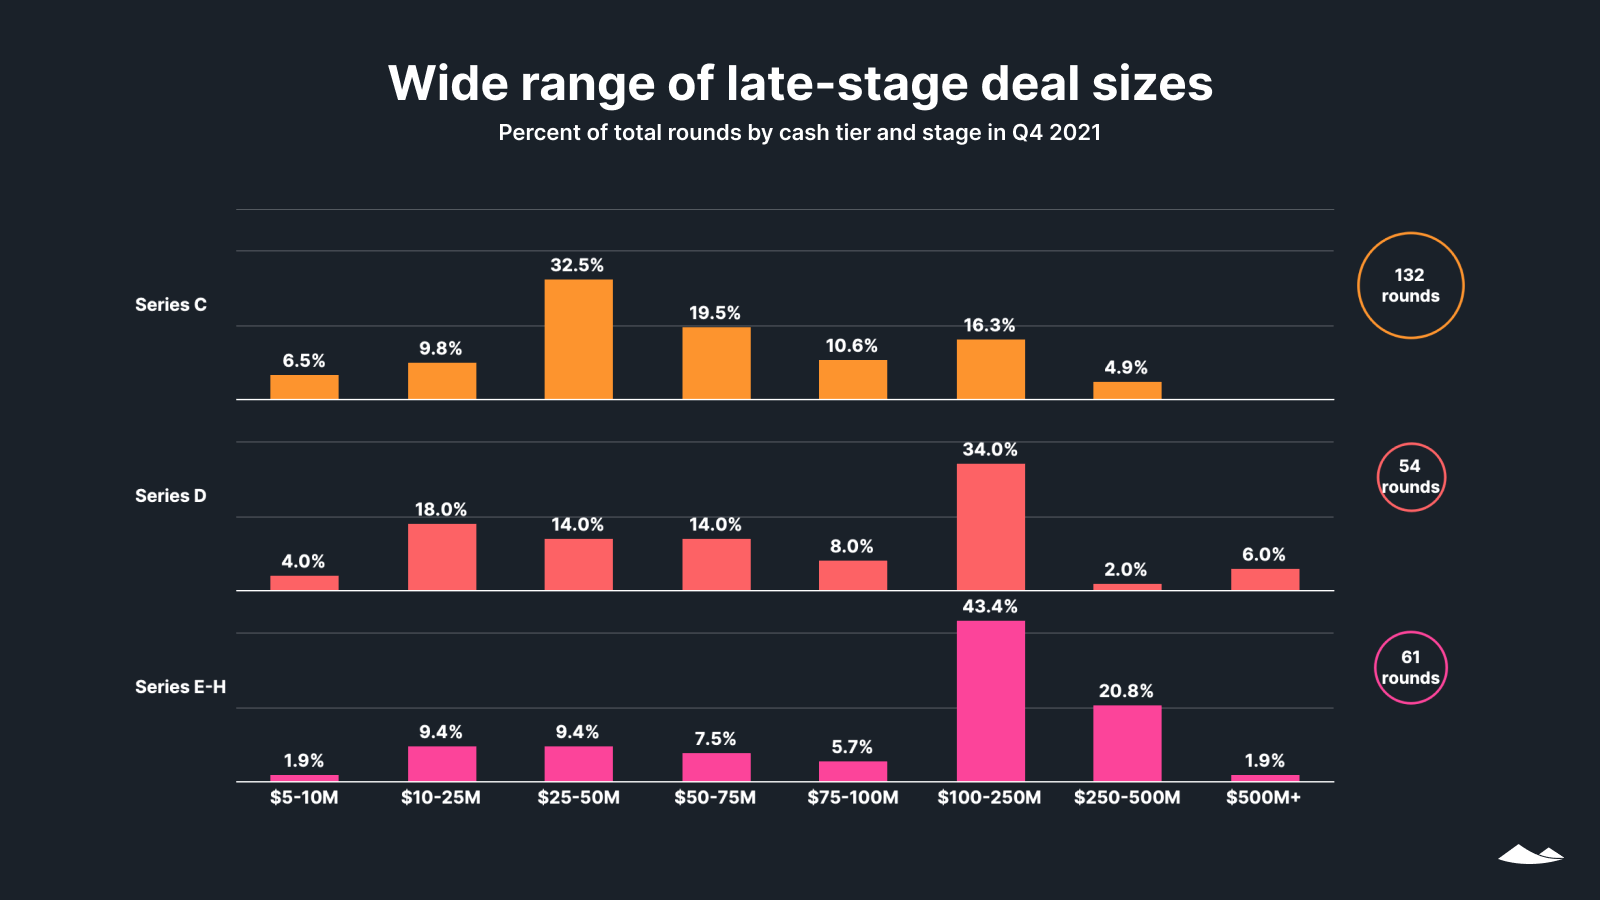 Wide range of late-stage deal sizes: Percent of total rounds by cash tier and late stage in Q4 2021